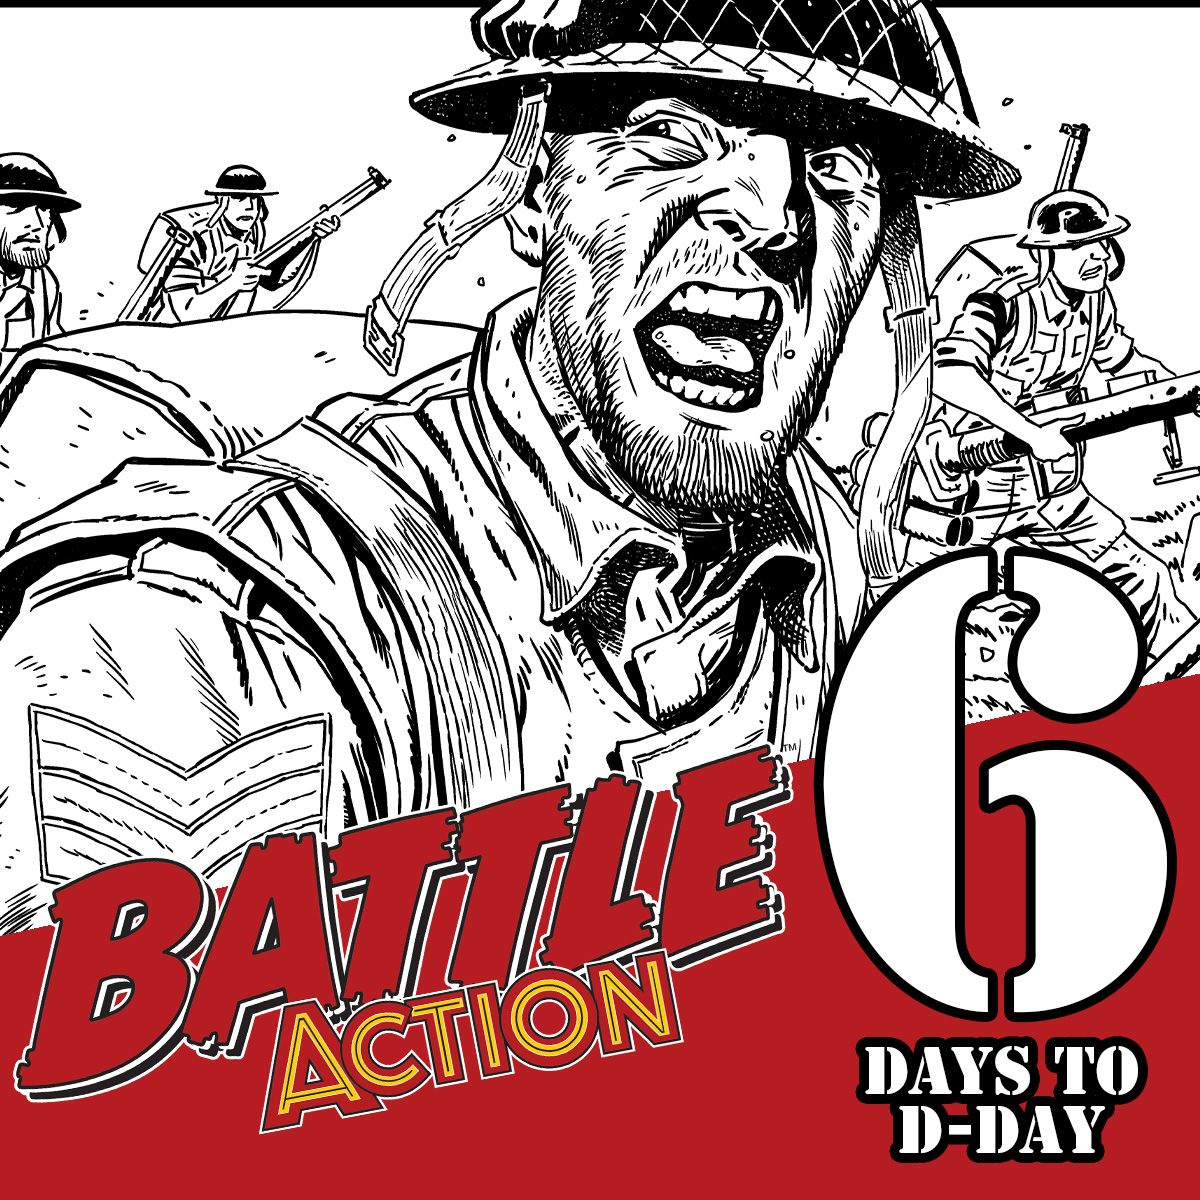 6 Days to Battle Action: meet The Sarge!